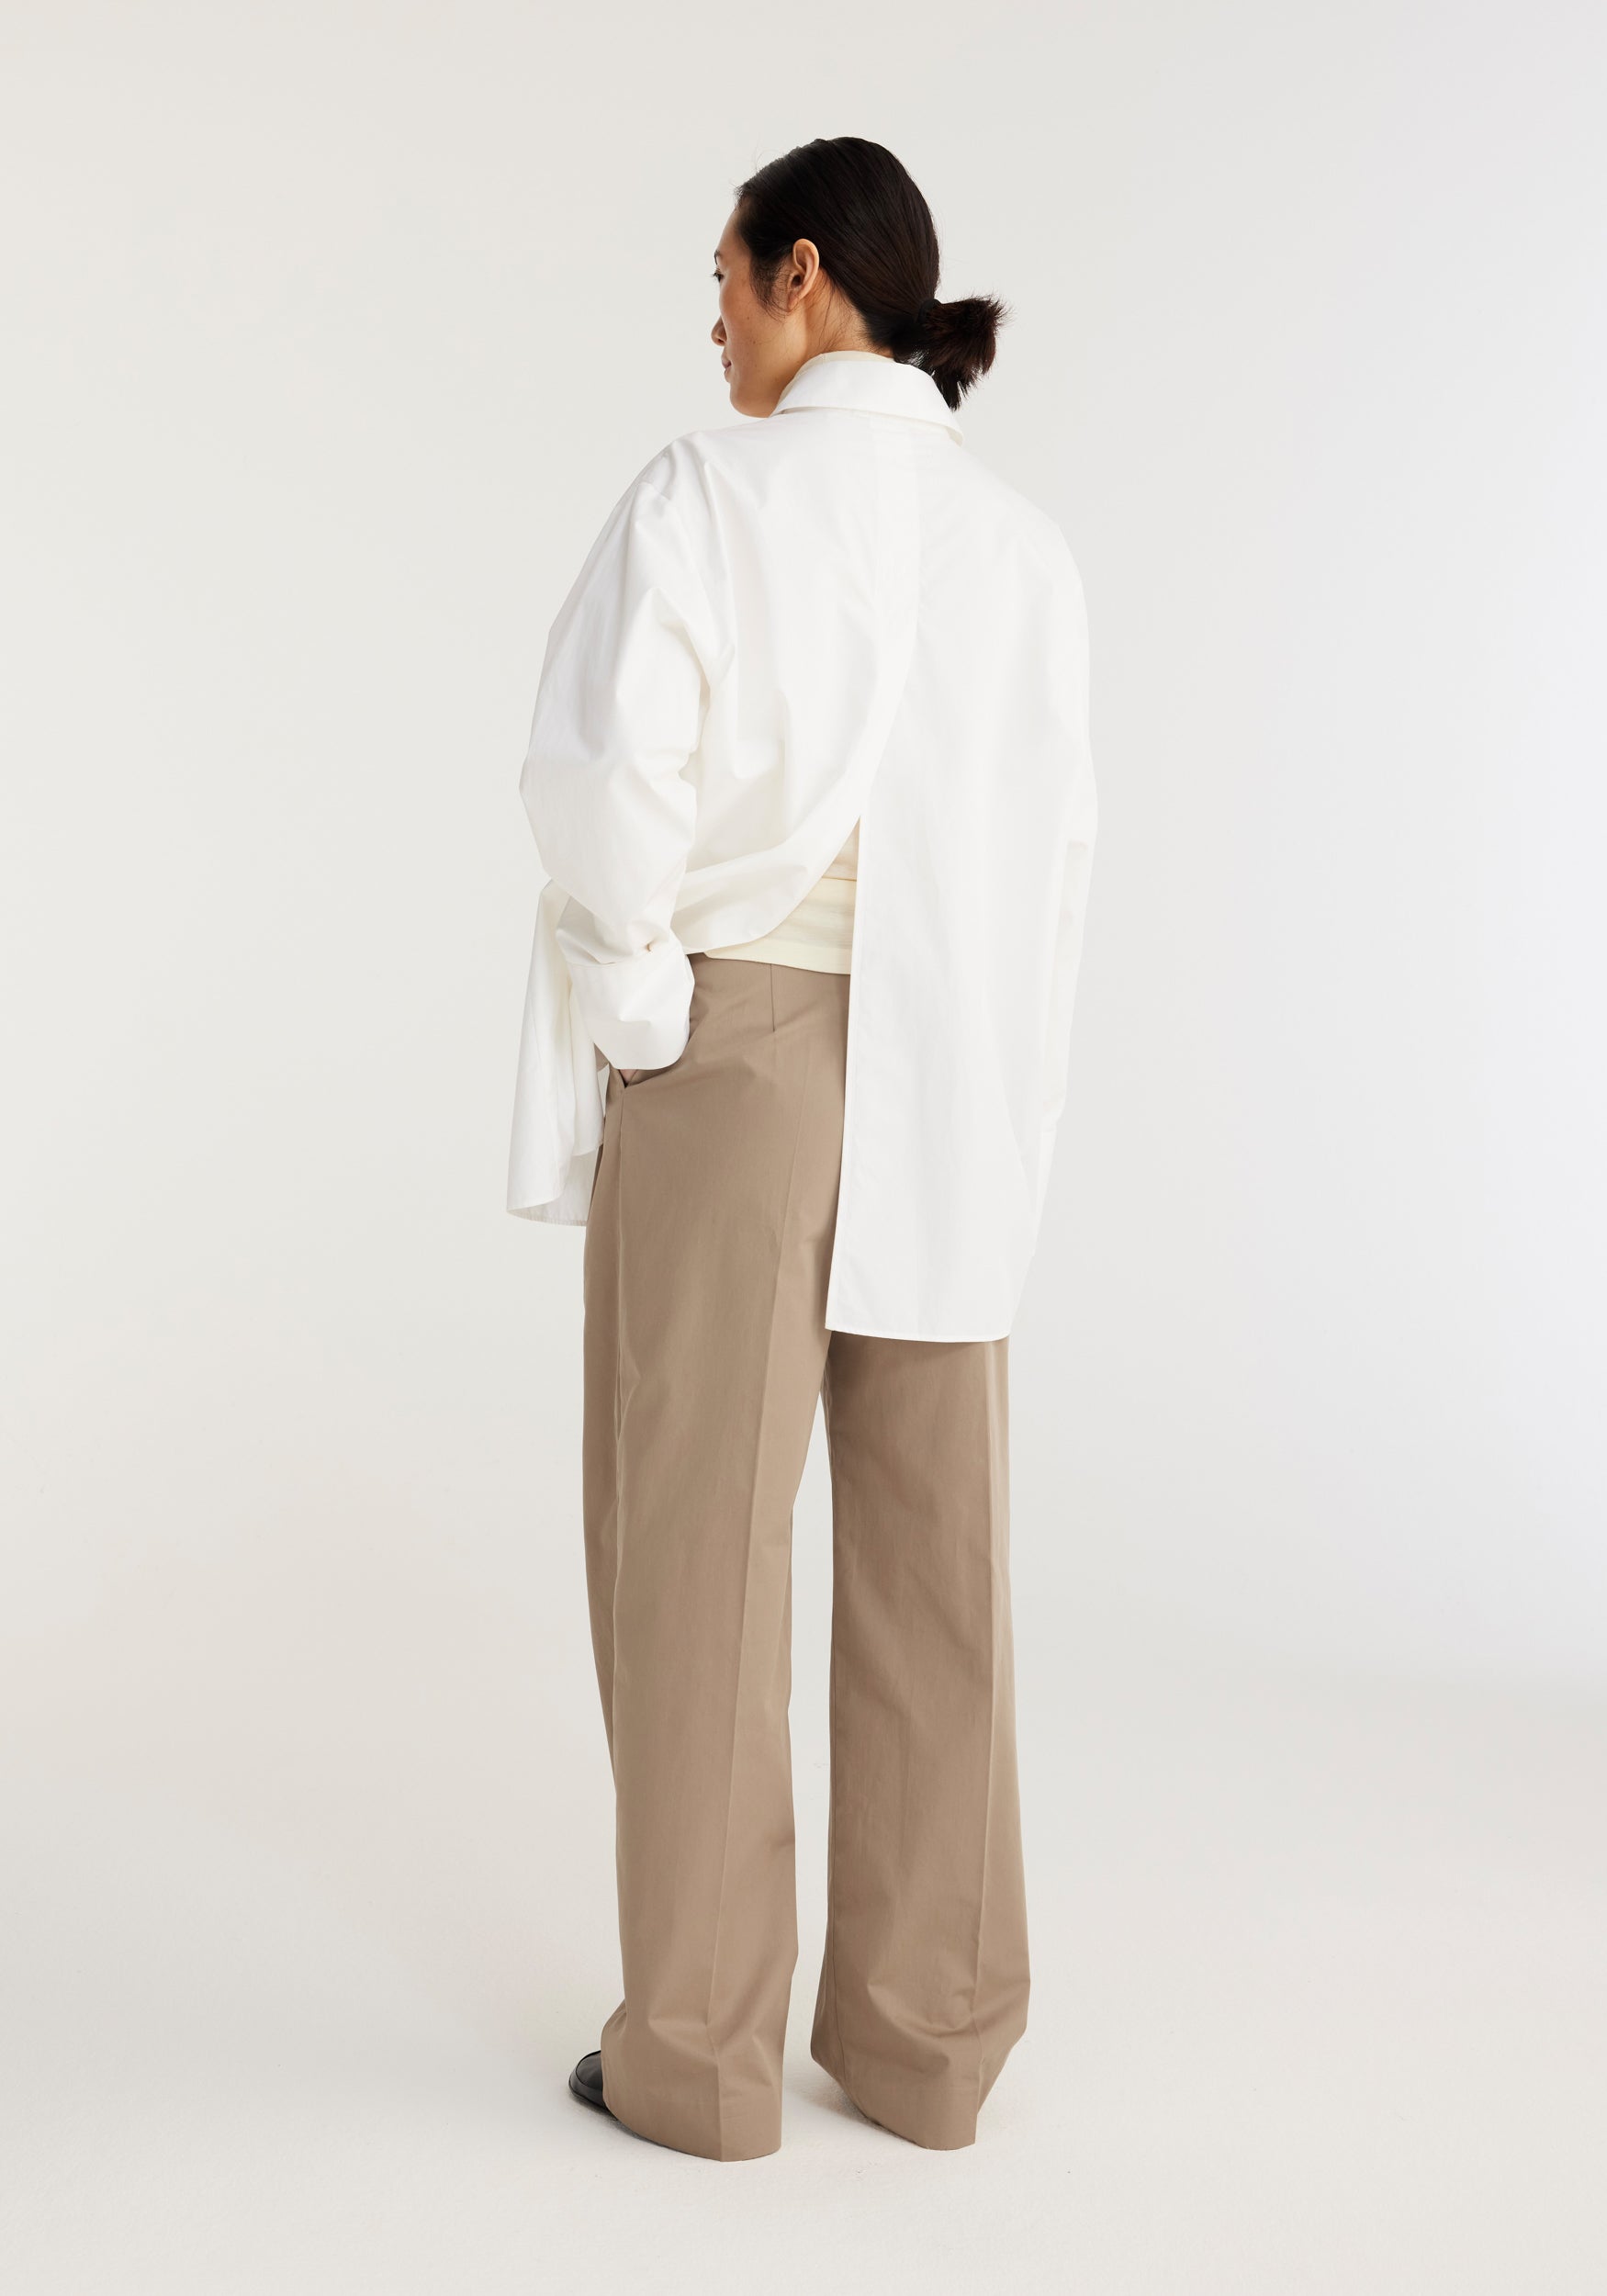 The Rohe Back Slit Shirt in White available at The New Trend Australia